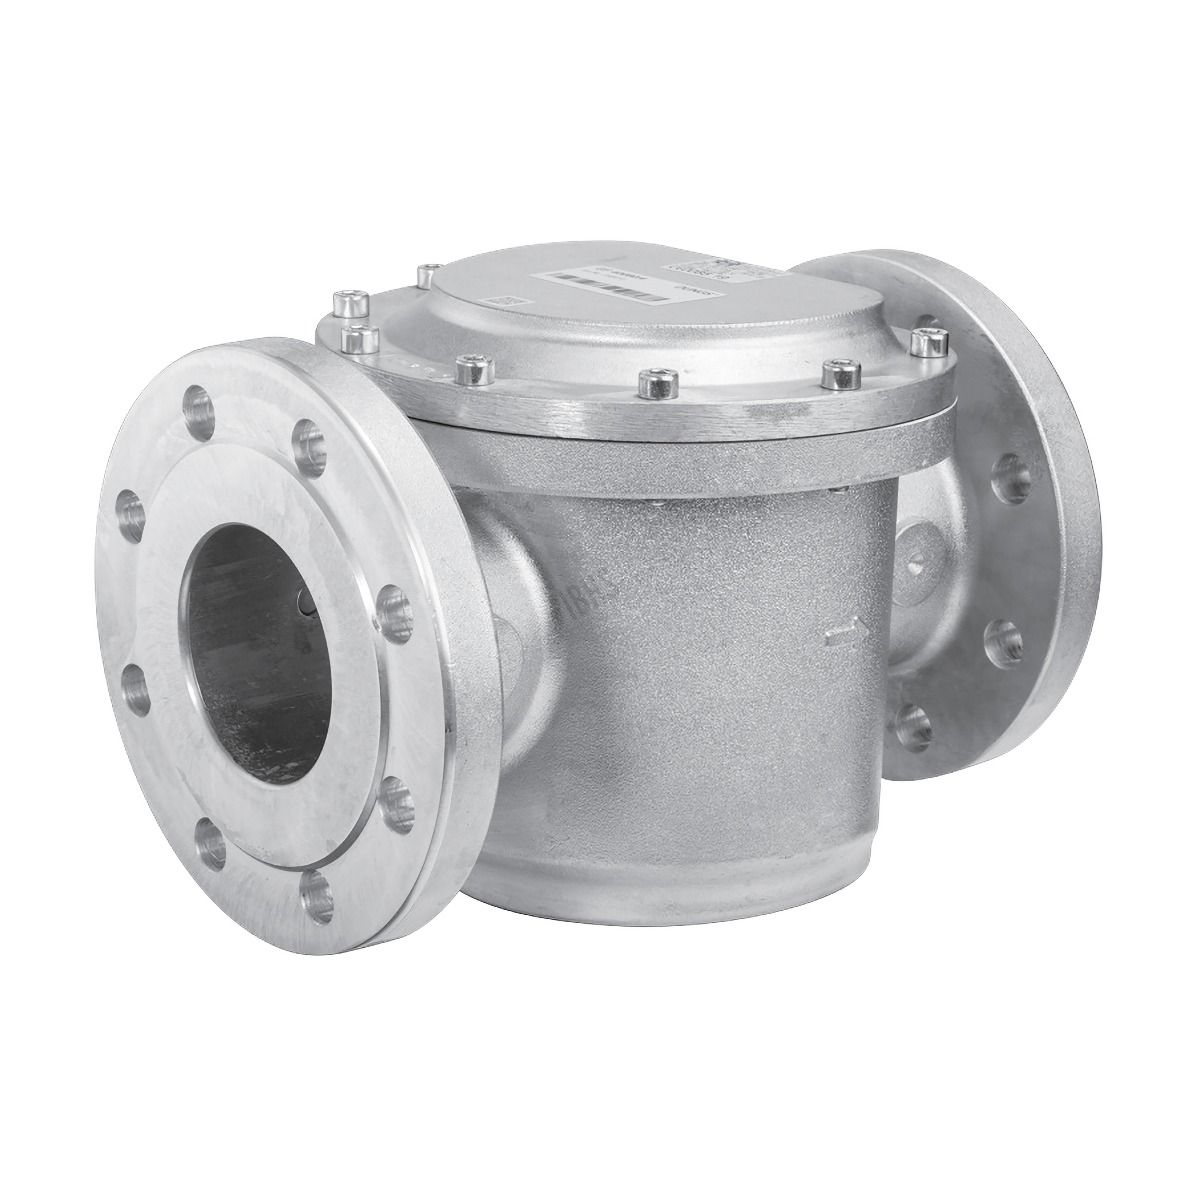 100mm Flanged PN16 Gas Filter 6 Bar Max Operating Pressure